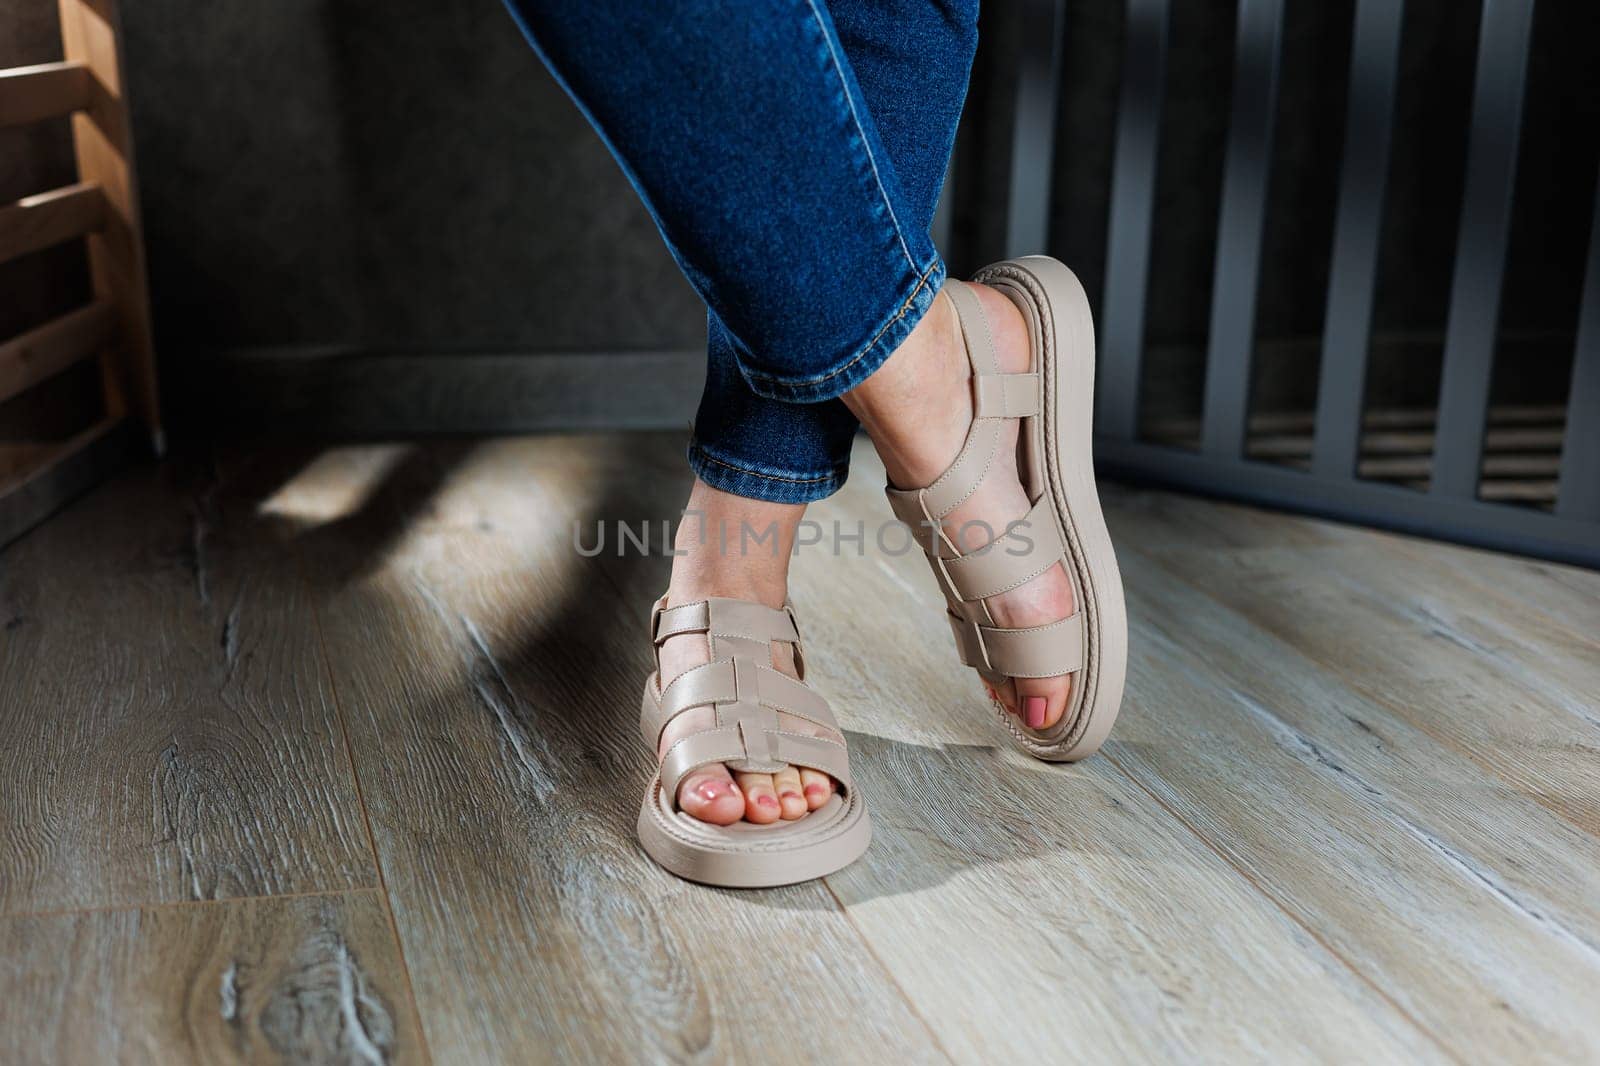 Collection of women's leather summer sandals. Slender female legs in beige leather sandals without heels.